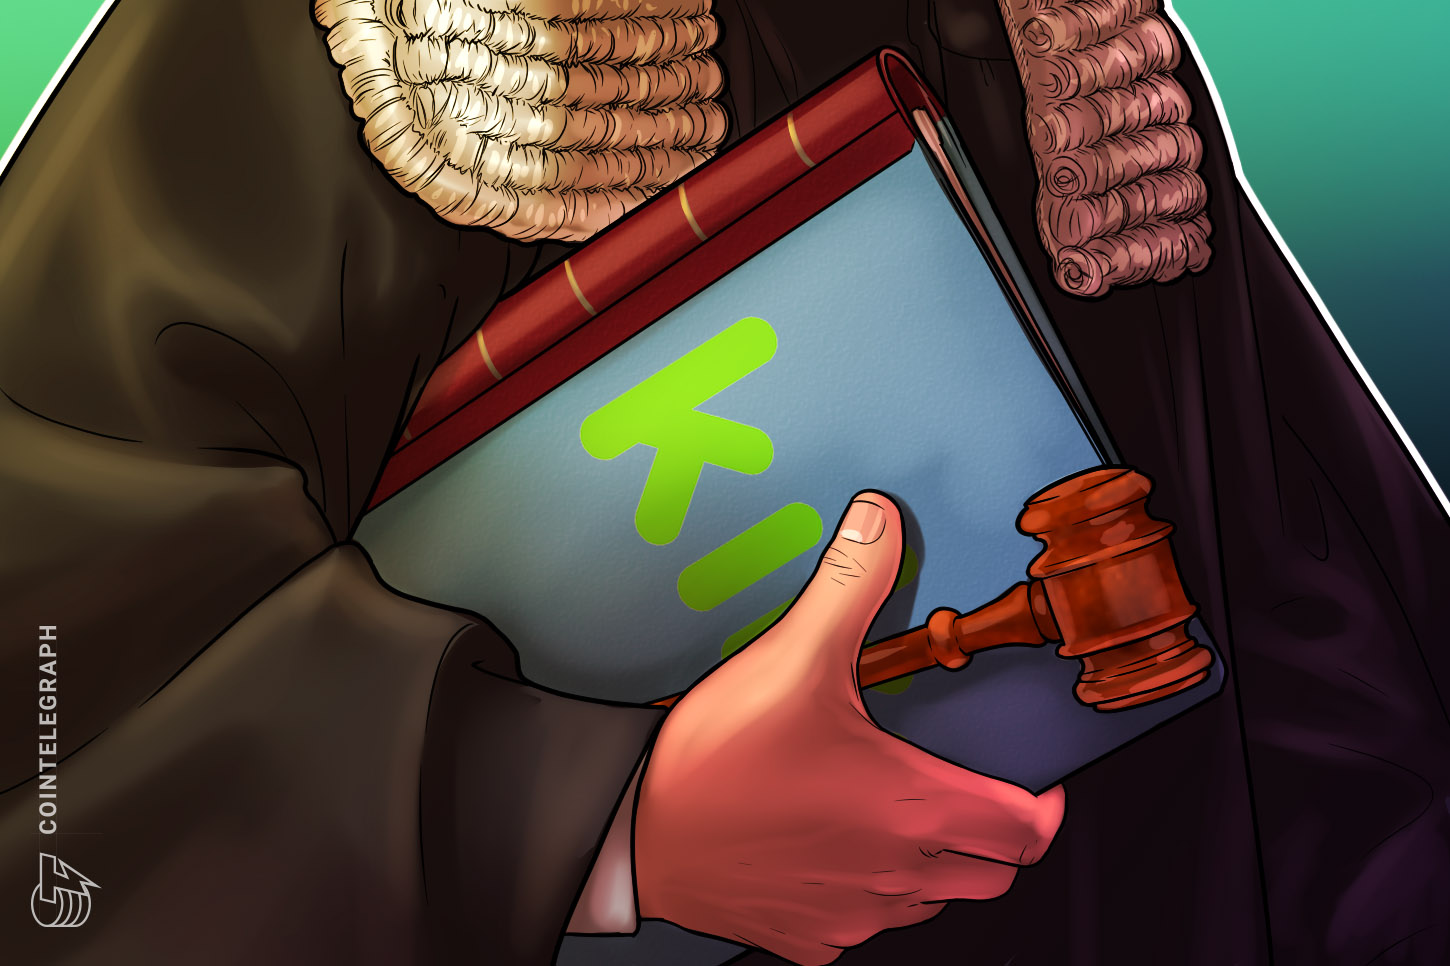 SEC sees $5M victory in case in opposition to Kik